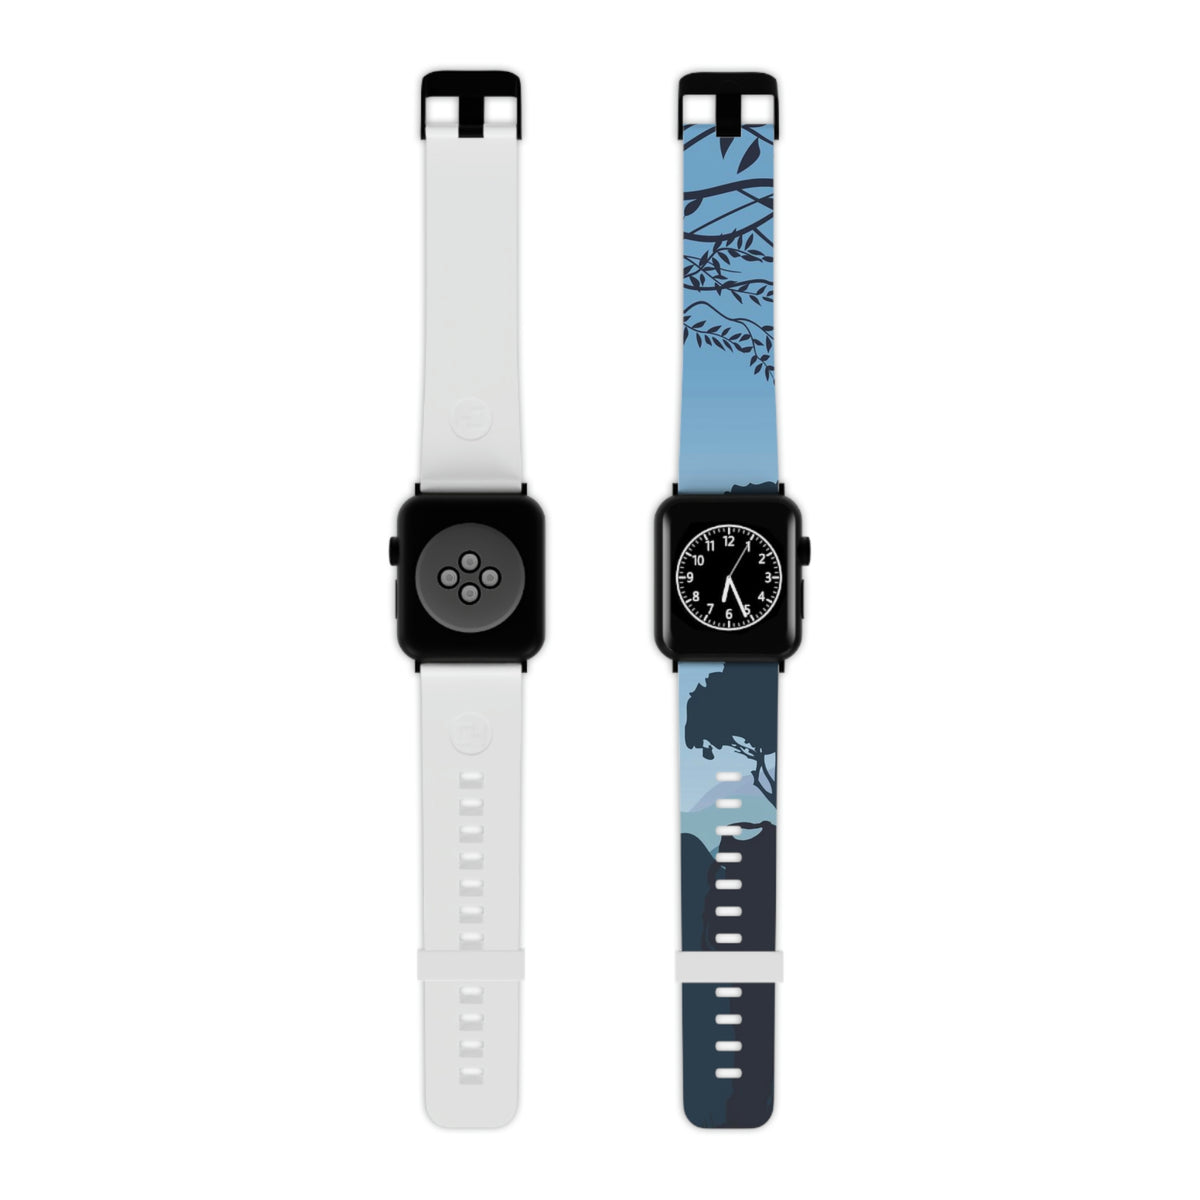 Clout Demons Watch Band for Apple Watch